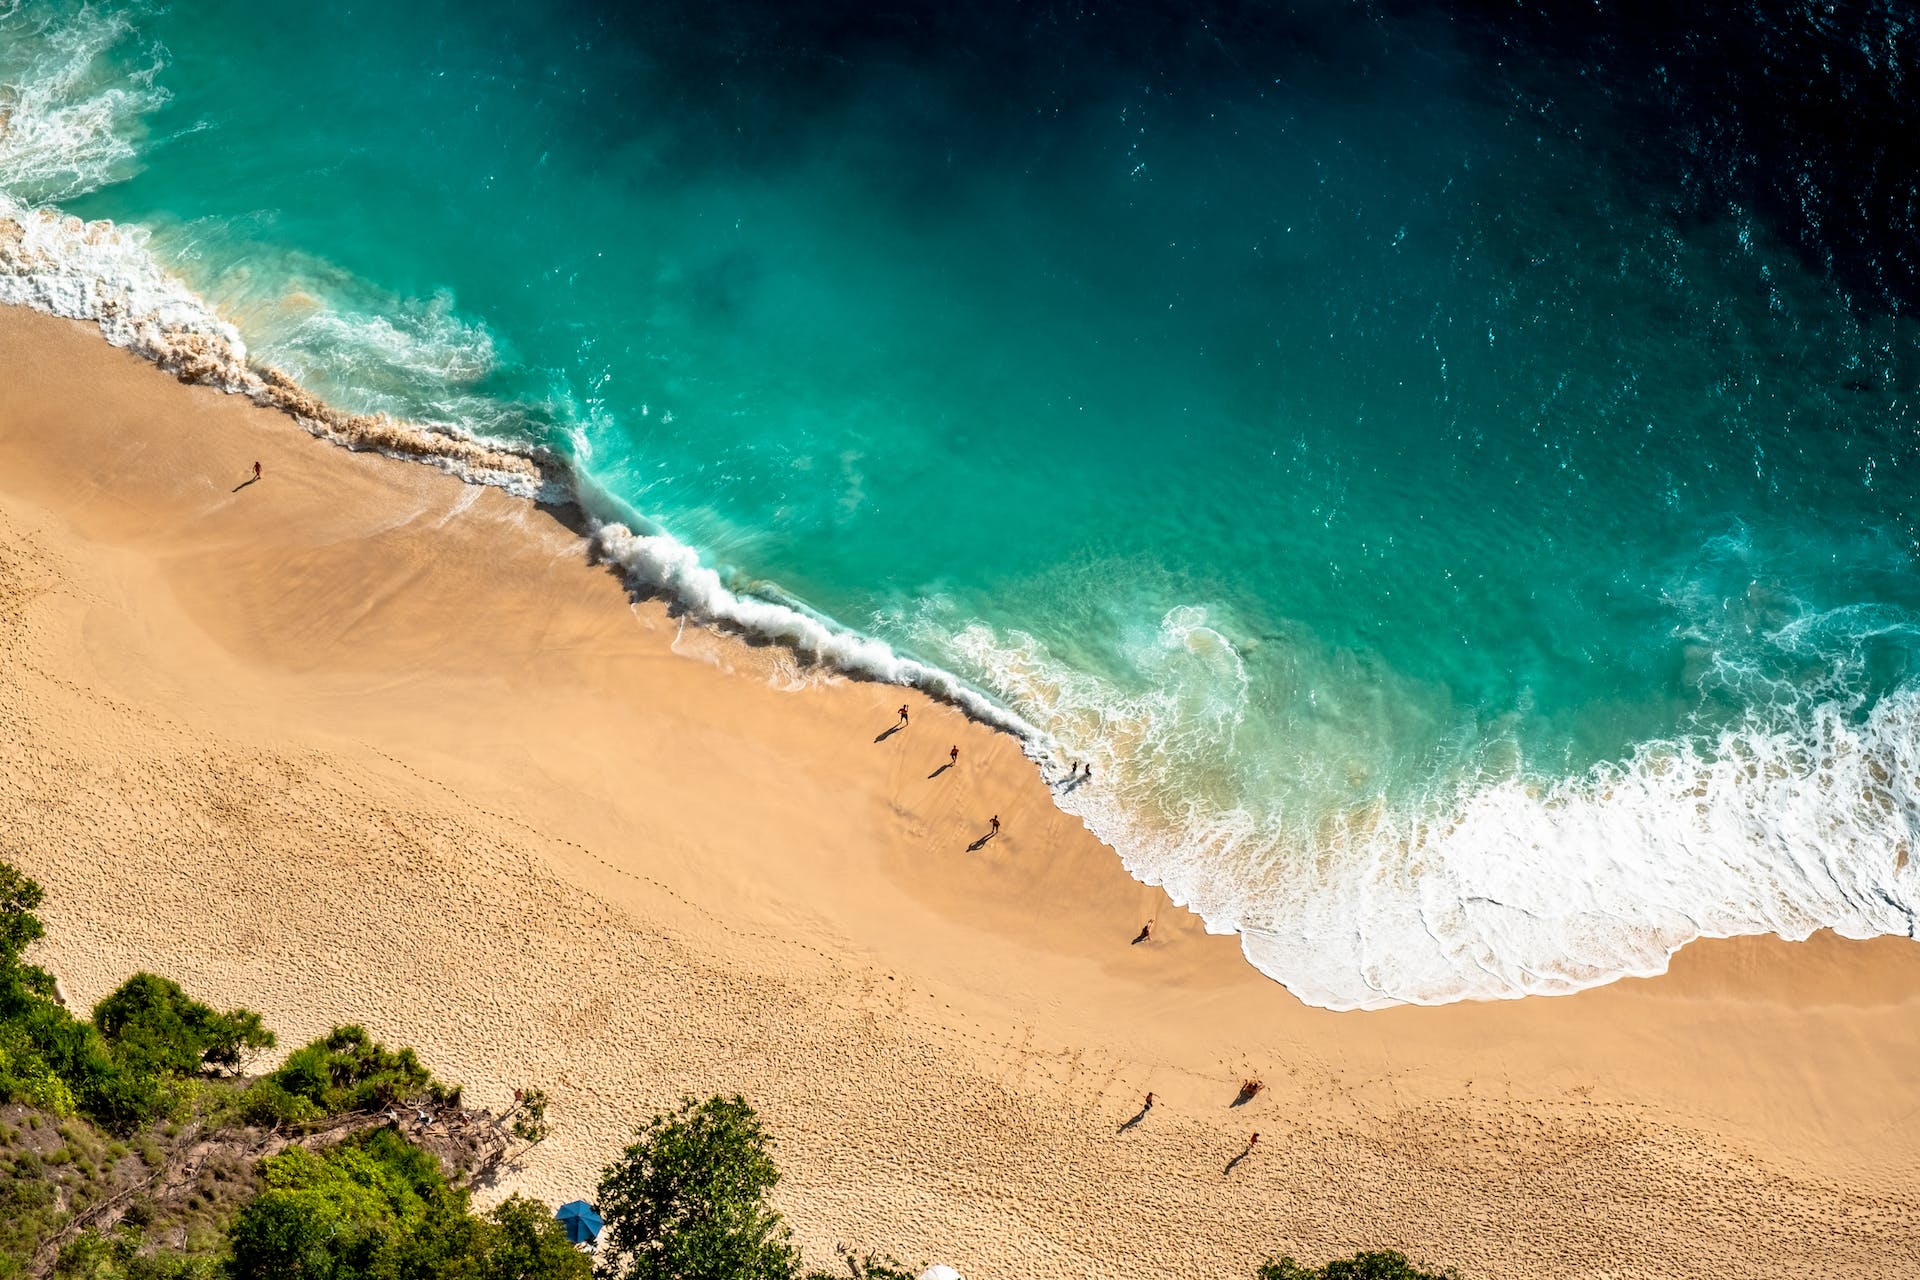 Drone image of beach | Source: Pexels